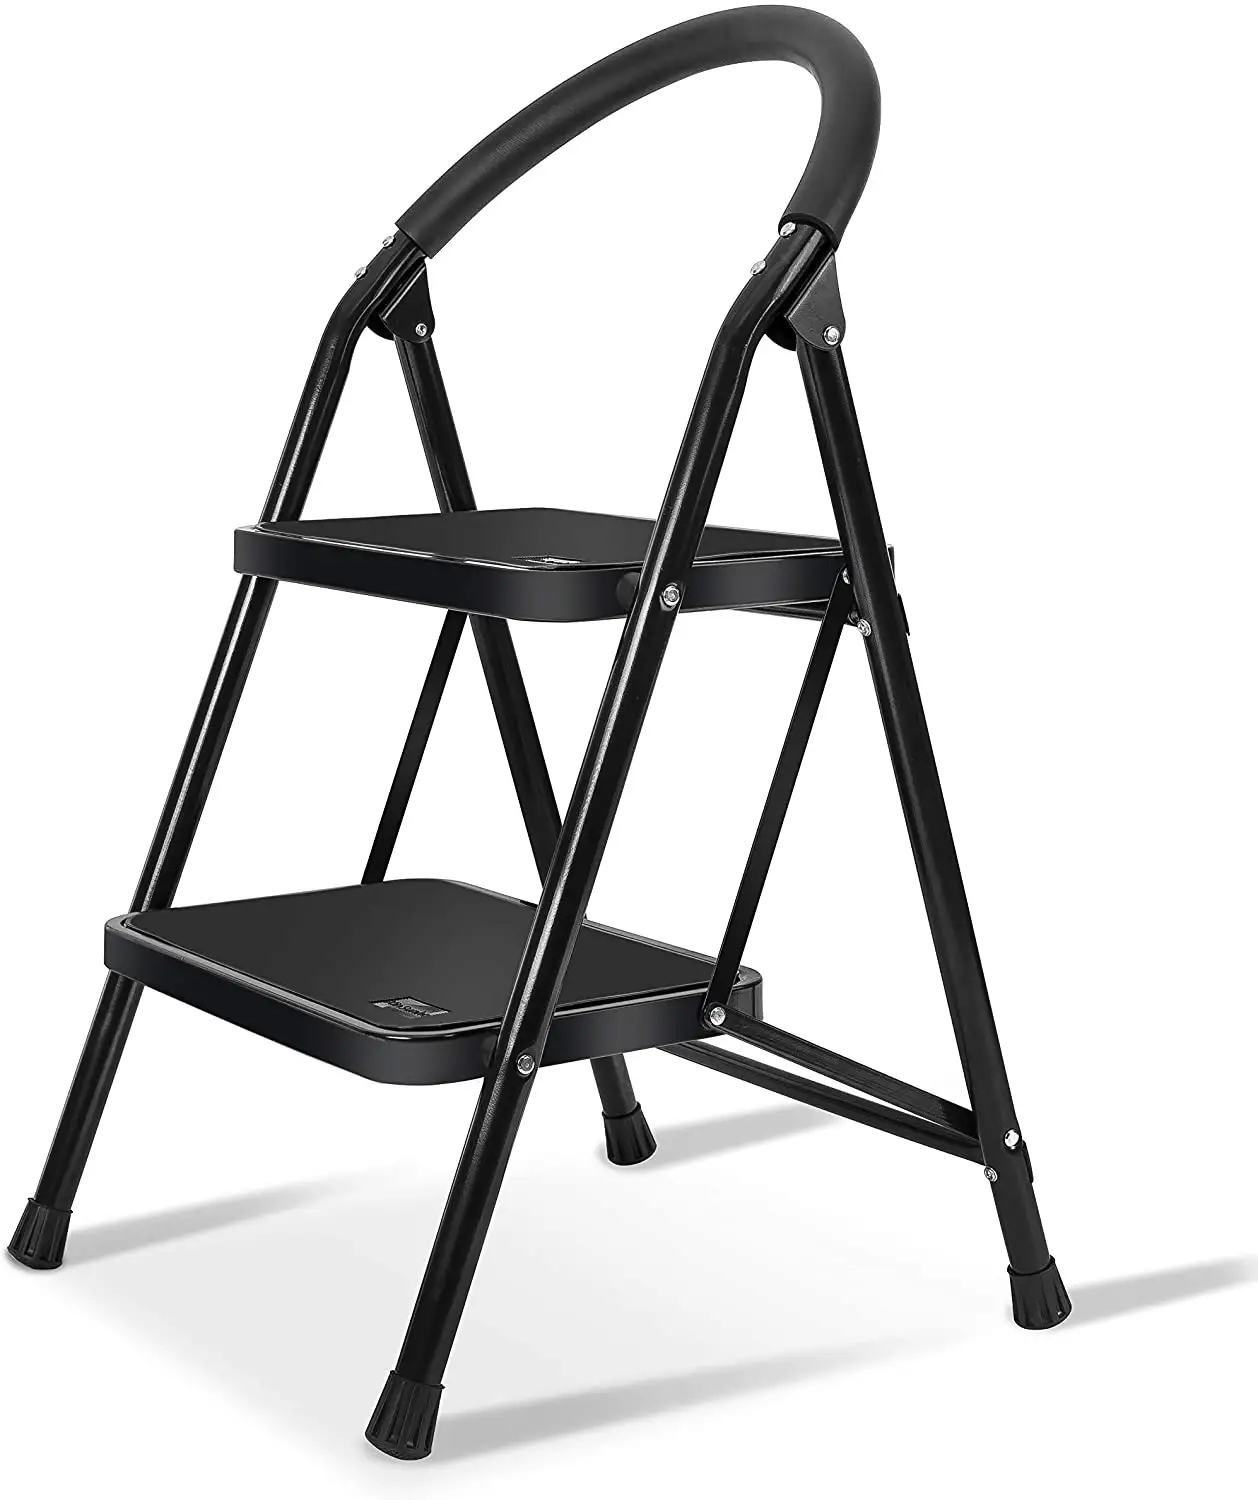 How to choose the right ladder?What are the considerations when choosing?